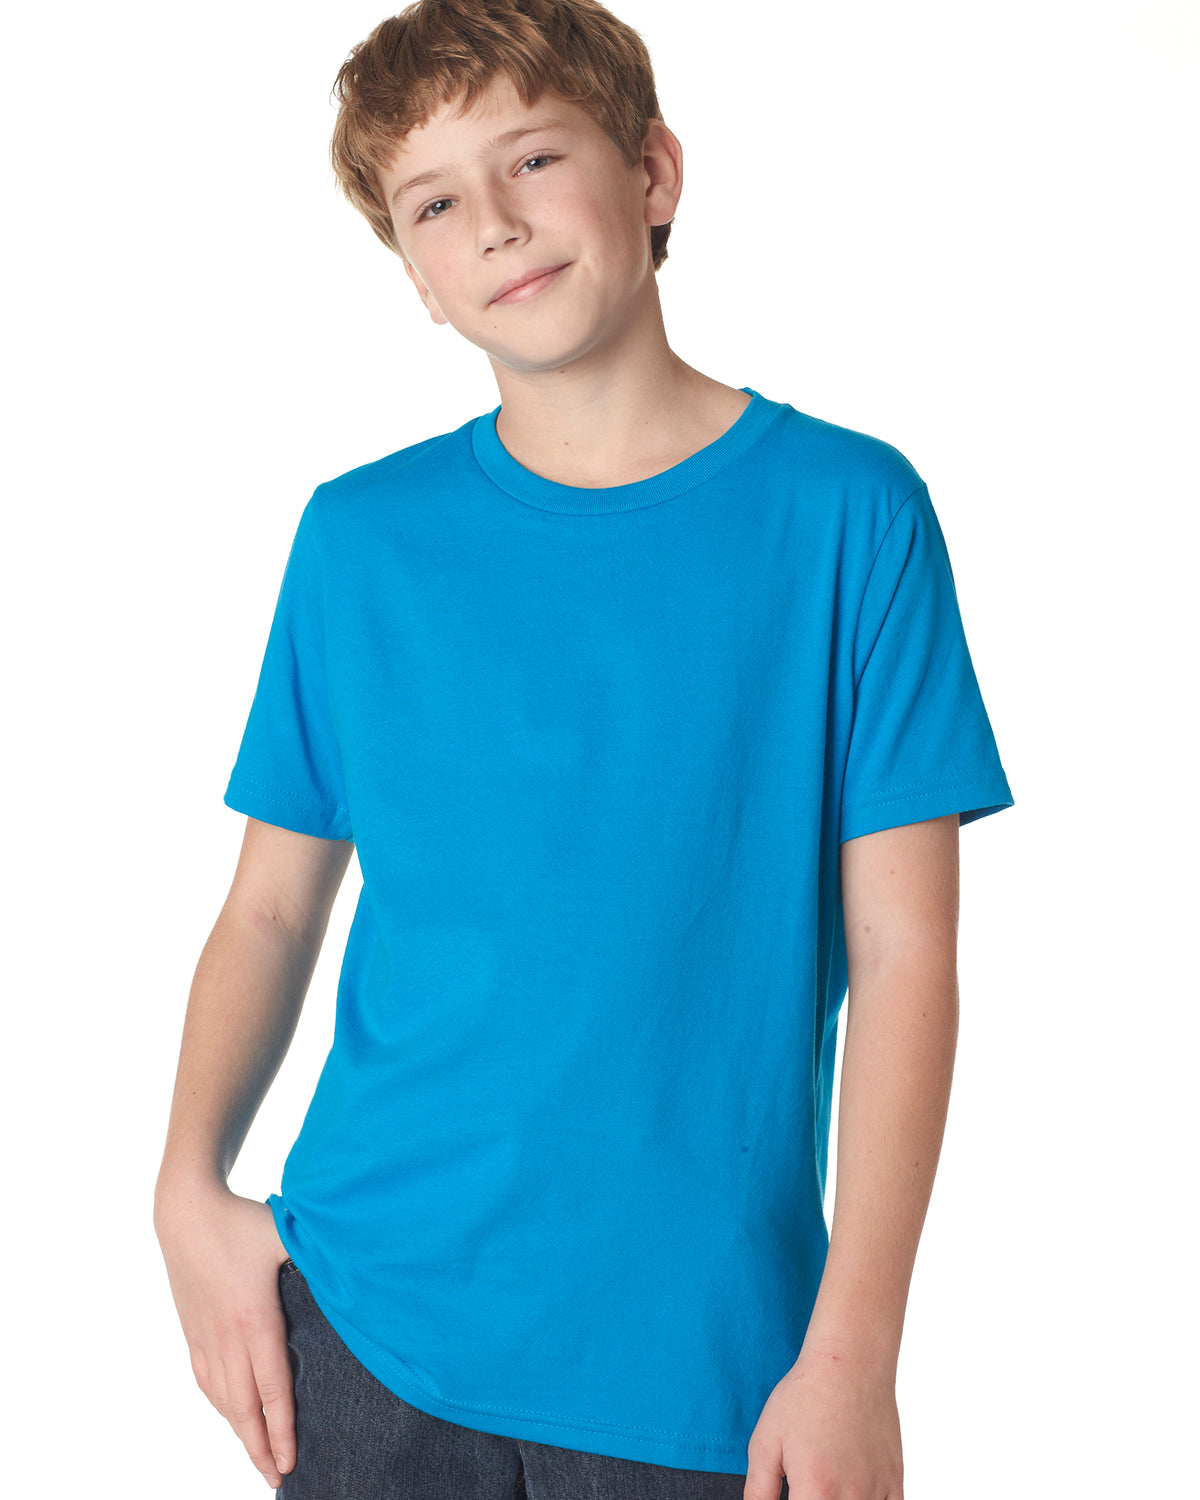 child model wearing next level youth tee in turquoise